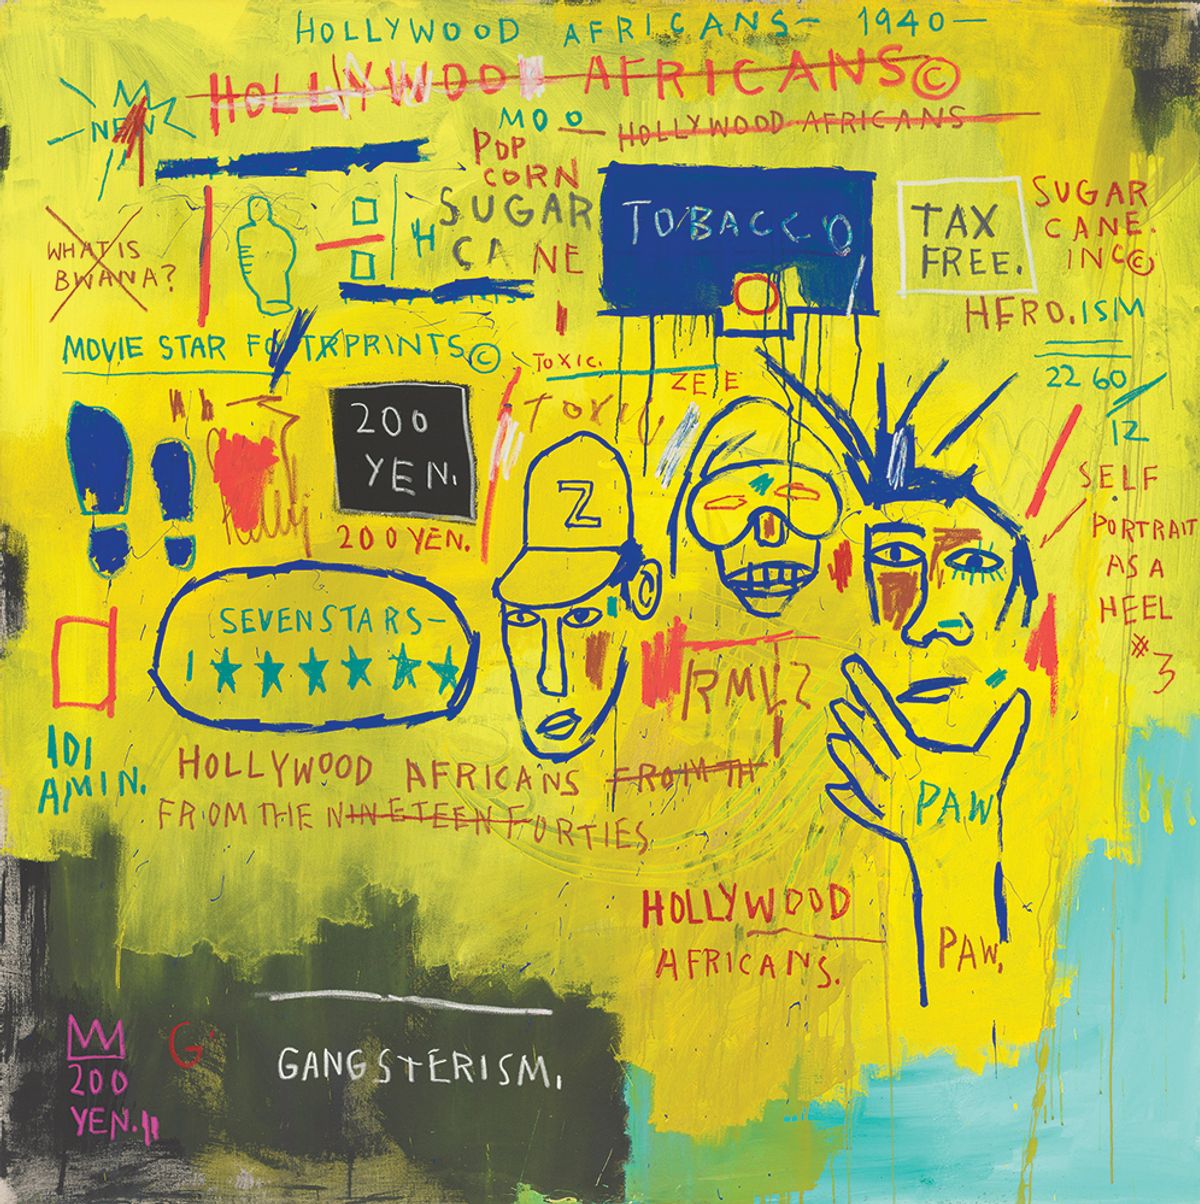 Hollywood Africans (1983) by Jean‑Michel Basquiat © Whitney Museum of American Art/Licensed by Scala/Licensed by Art Resource; © The Estate of Jean-Michel Basquiat/Licensed by Artestar, New York; Courtesy Museum of Fine Arts, Boston